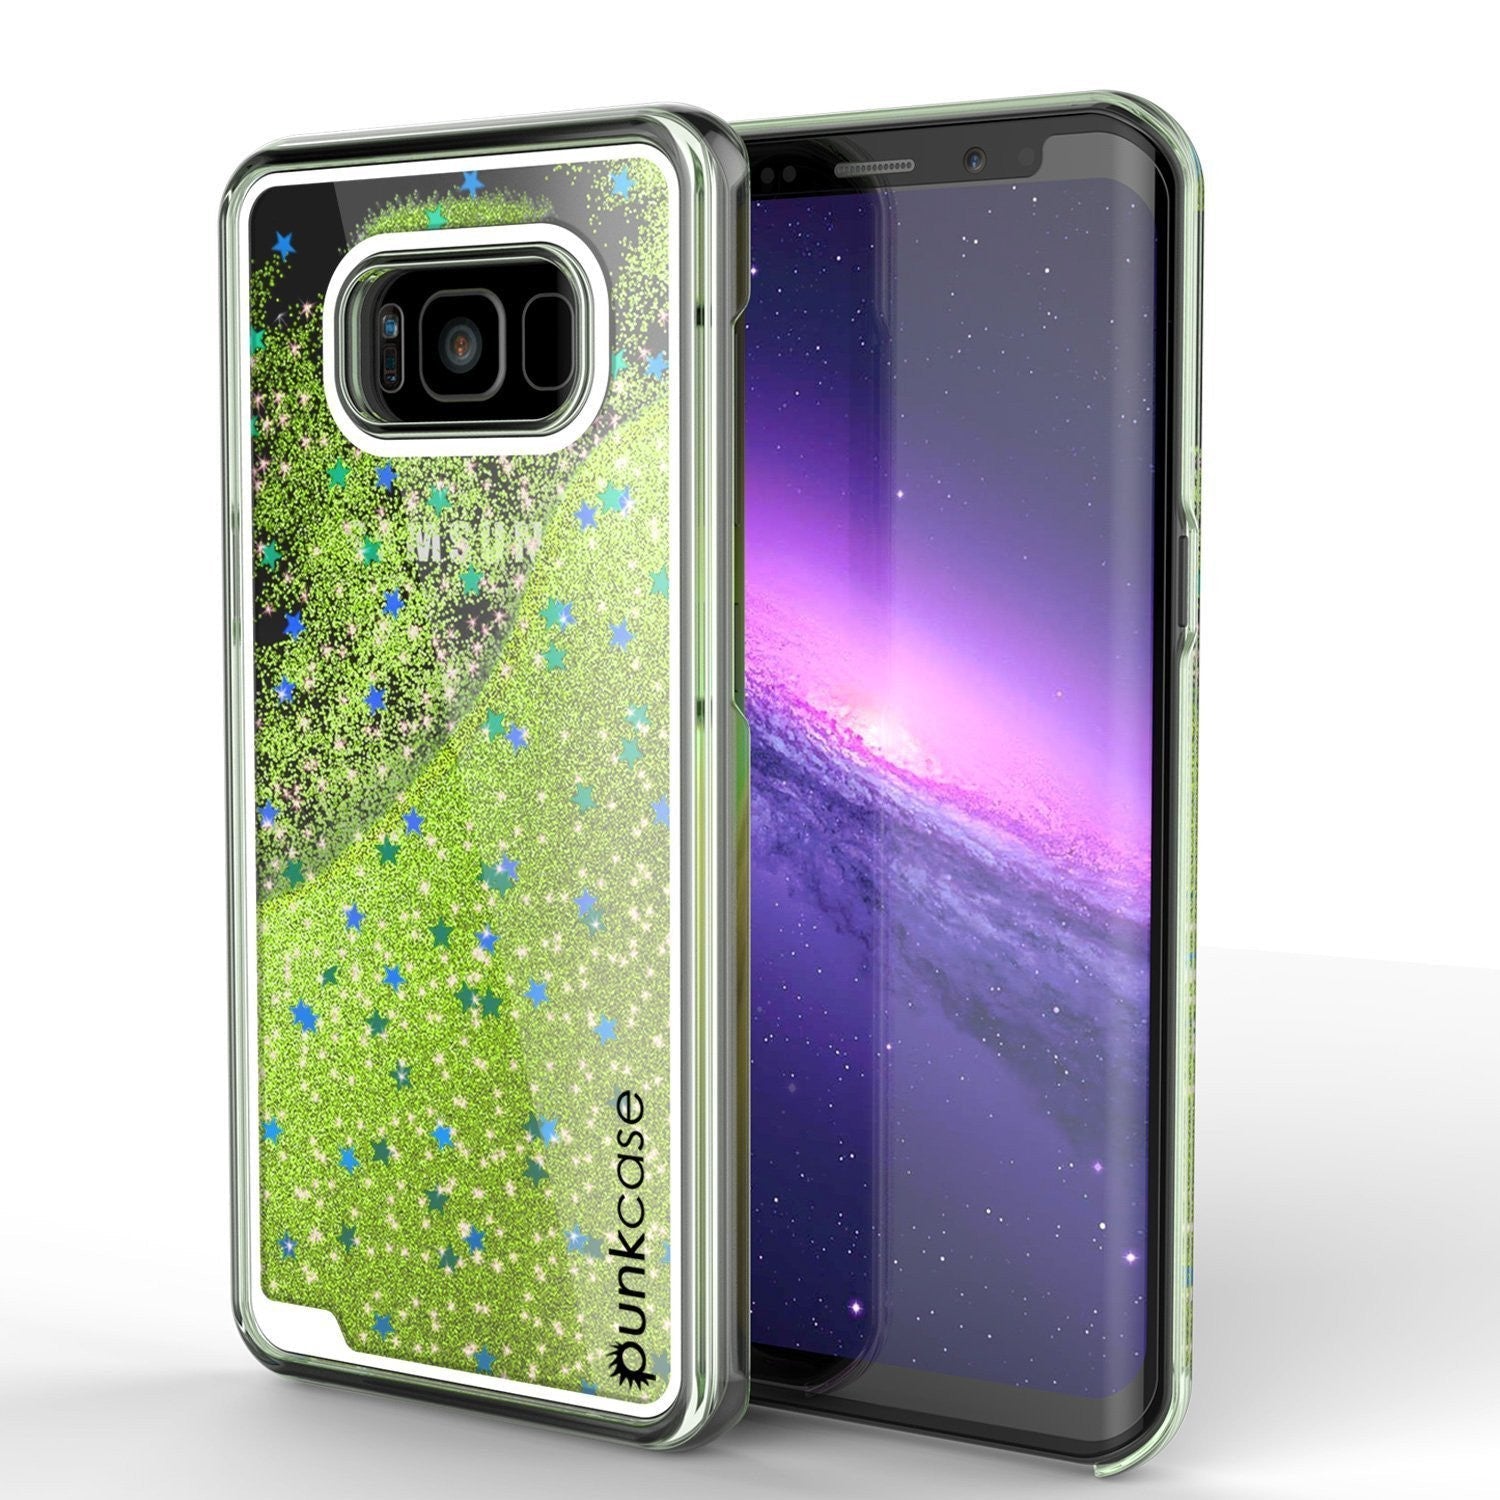 Galaxy S8 Case, Punkcase [Liquid Series] Protective Dual Layer Floating Glitter Cover + PunkShield Screen Protector [Light Green] (Color in image: Light green)